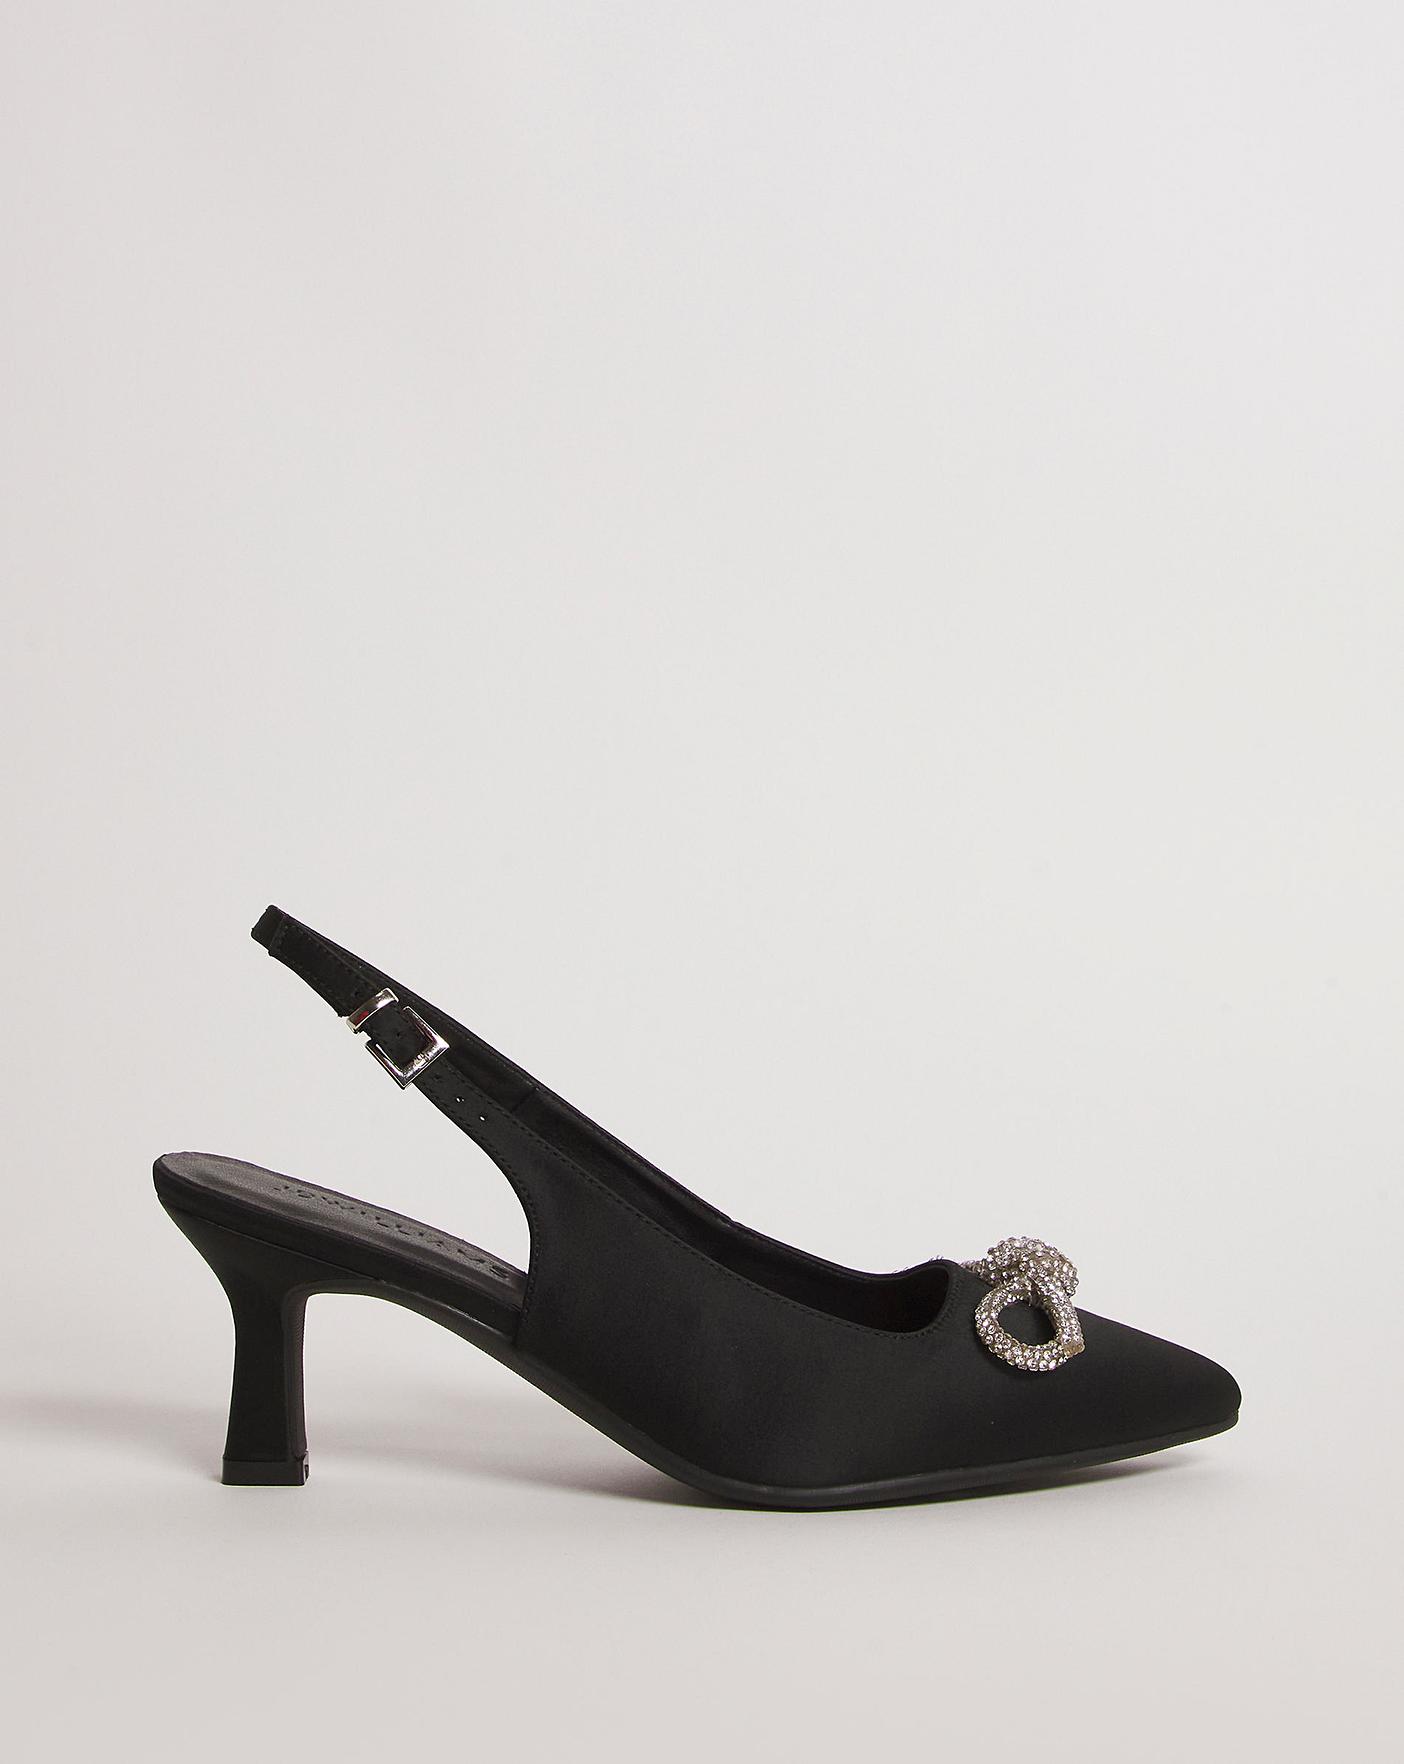 Satin Slingback with Bow Trim E Fit | J D Williams